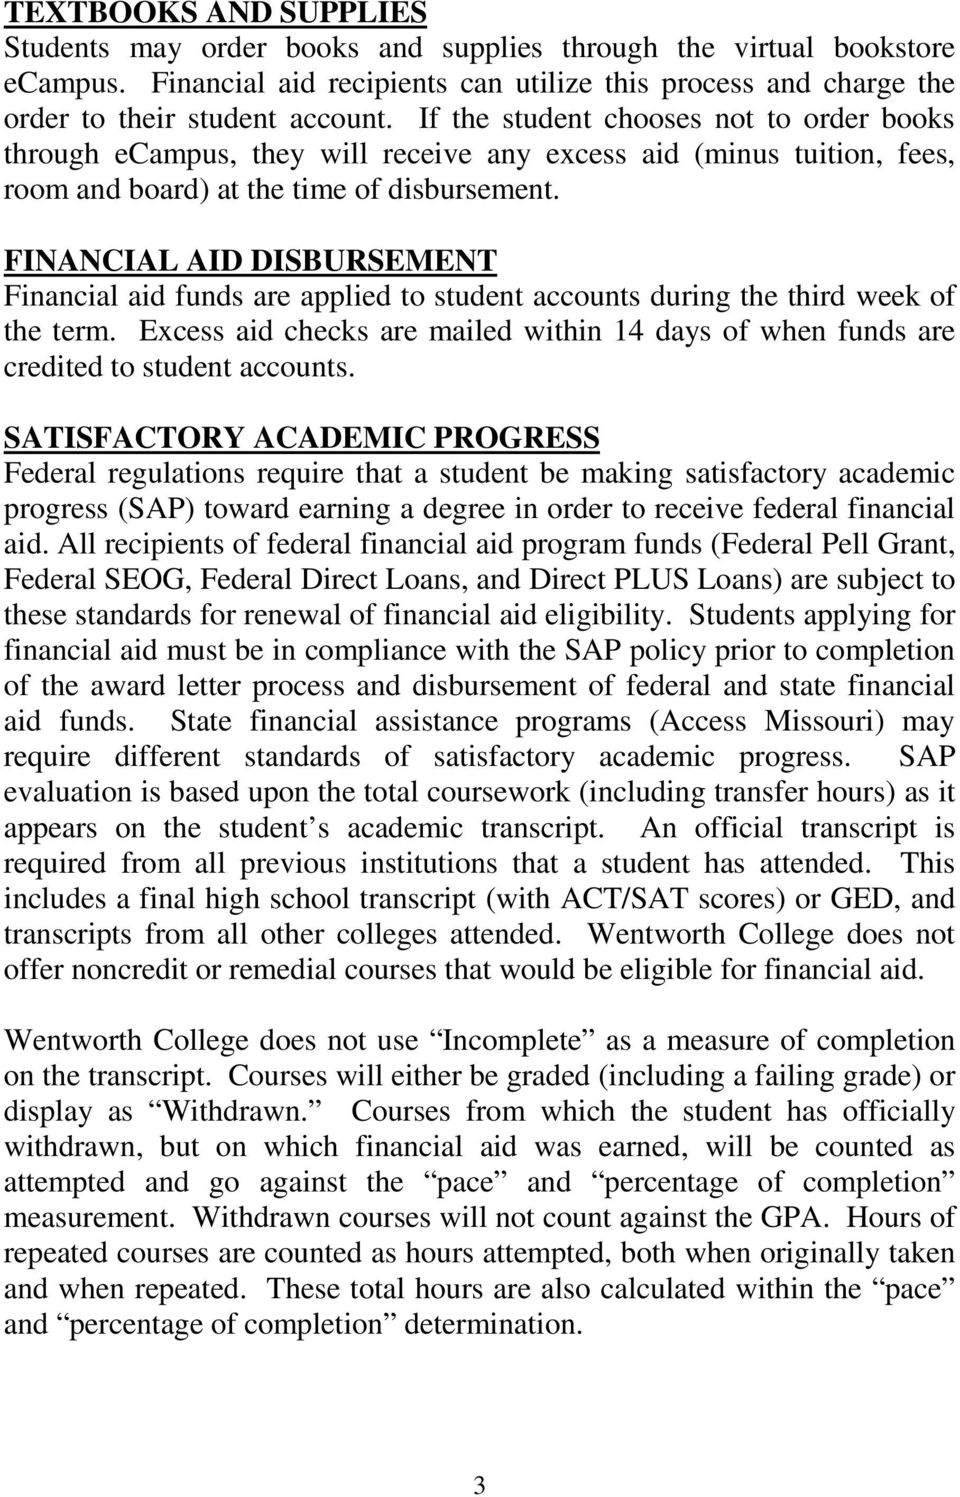 FINANCIAL AID DISBURSEMENT Financial aid funds are applied to student accounts during the third week of the term.